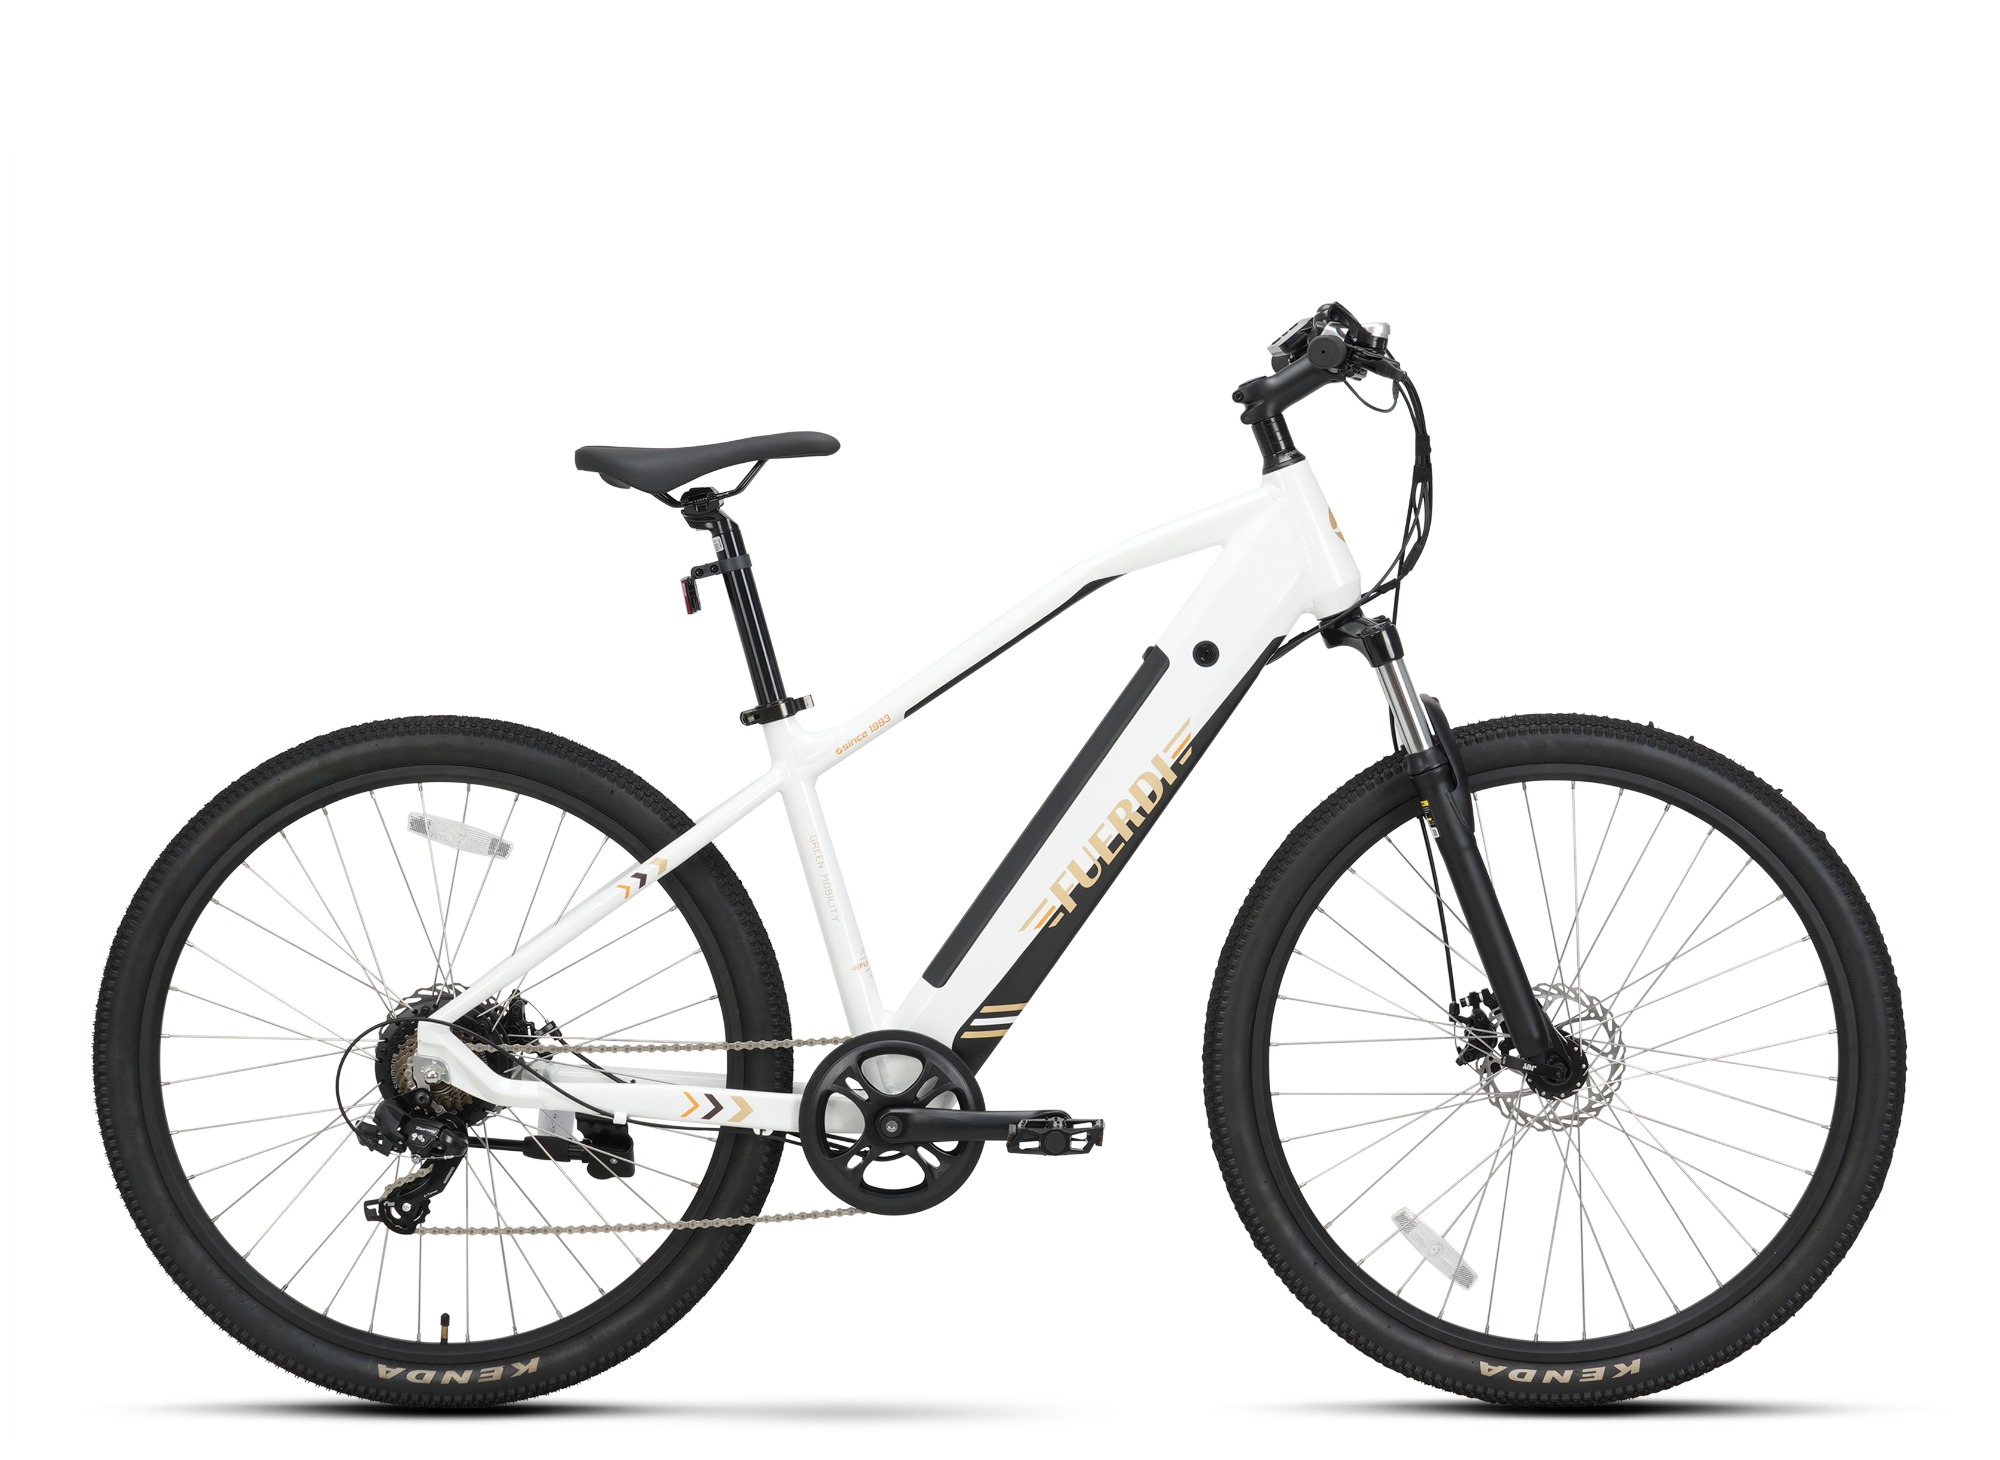 Fuerdi produces ebikes, bike parts, escooters and more